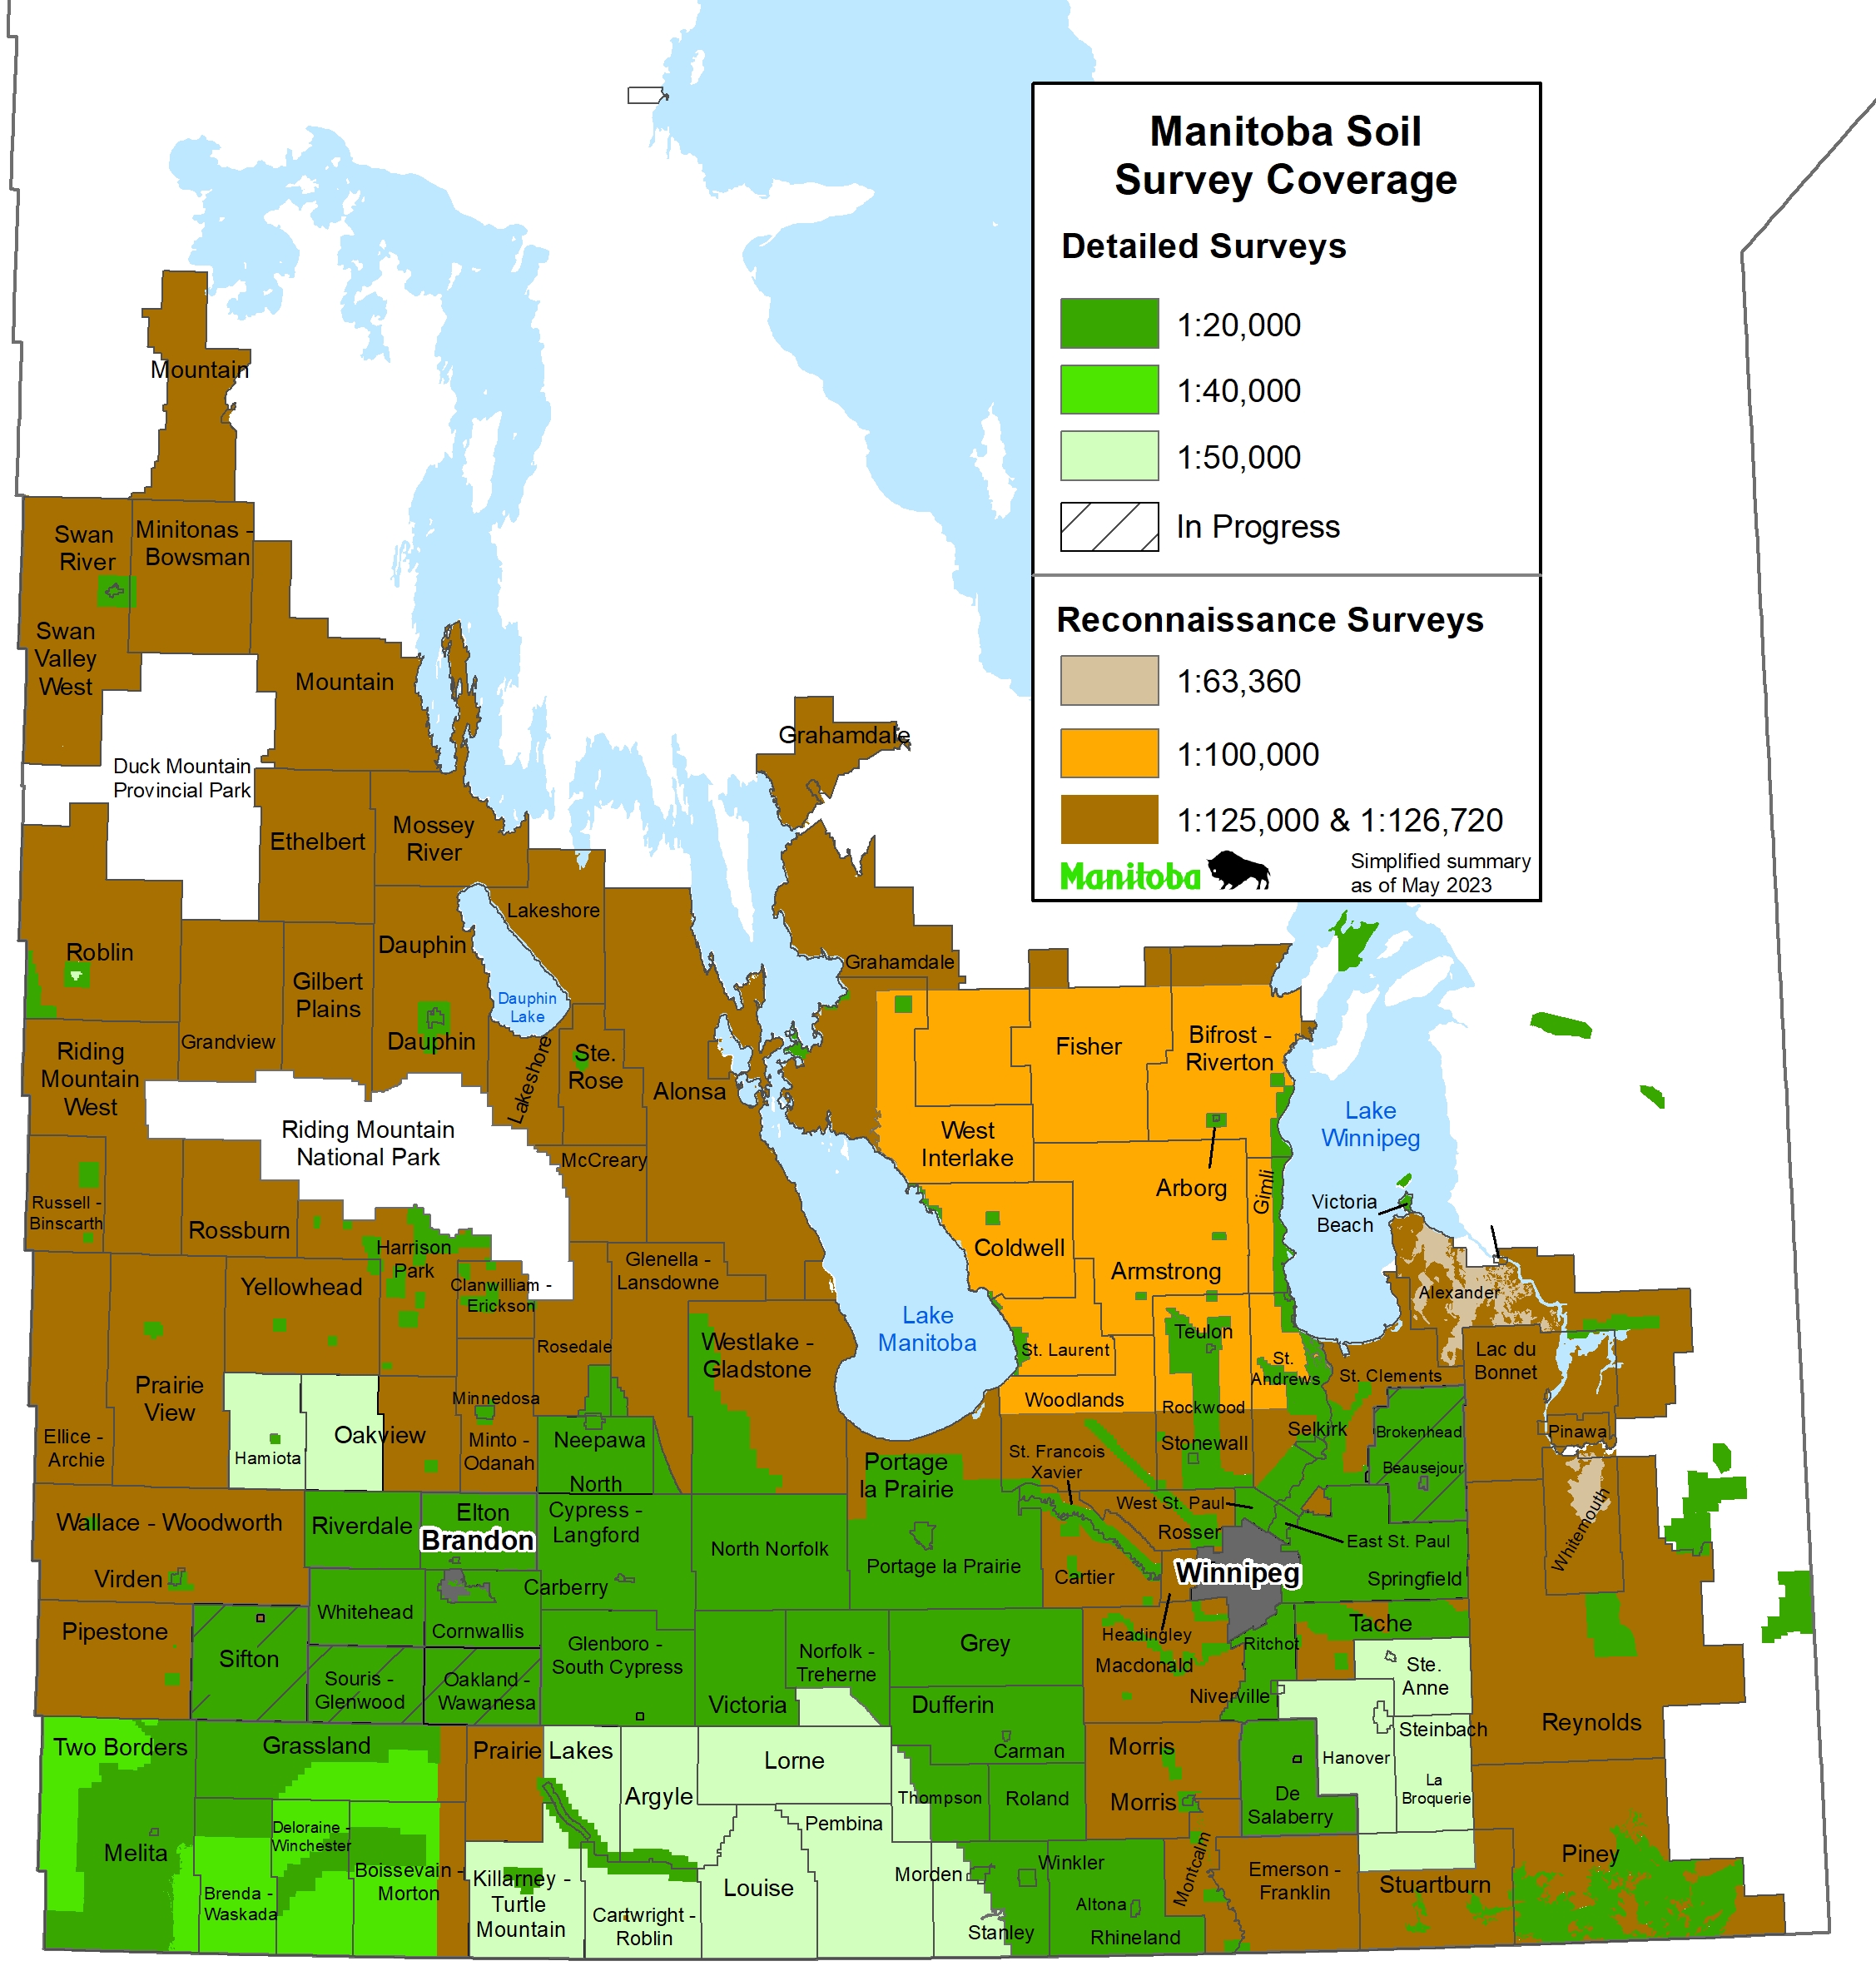 A Soil Survey coverage map of Agro-Manitoba. The map displays scale coverage of detailed and reconnaissance scale by color.